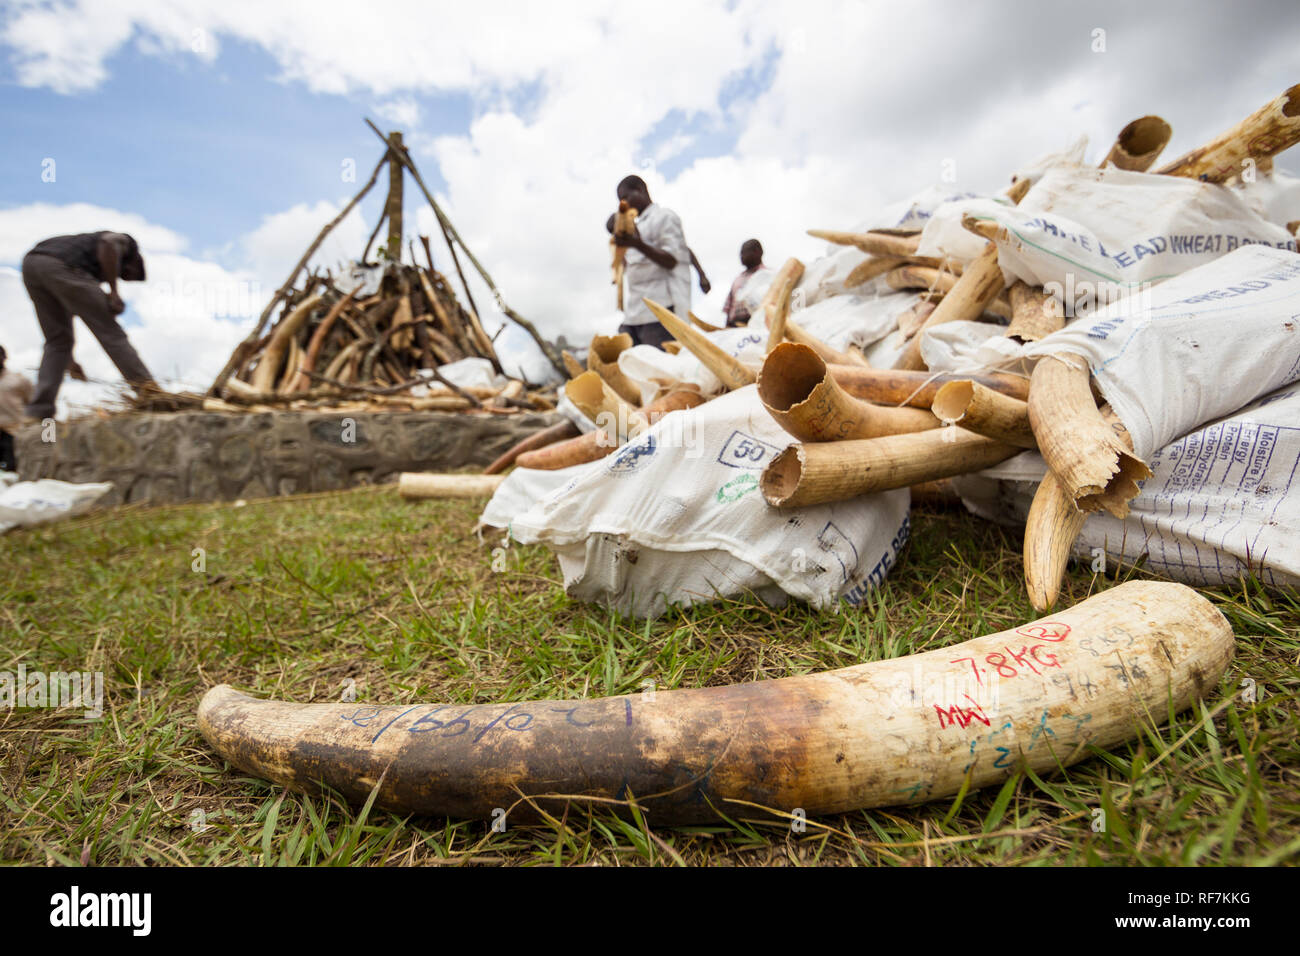 Workers stack confiscated elephant ivory into a pile to be burned in an official ceremony outside parliament in Lilongwe, Malawi Stock Photo